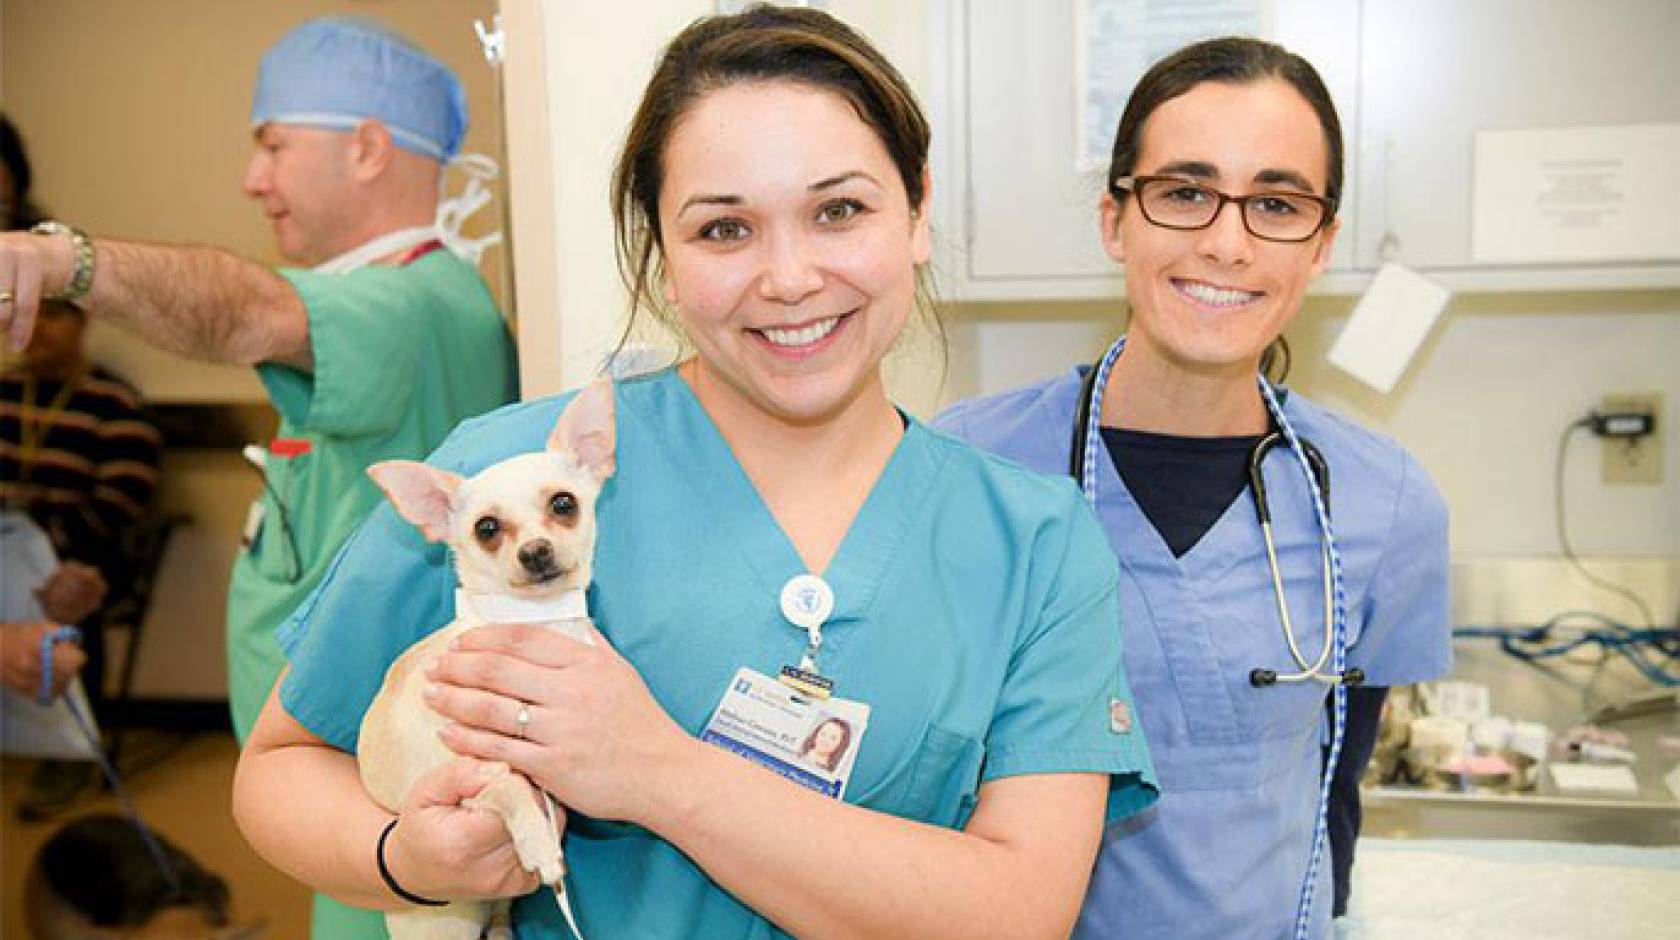 A vet tech holds a dog while a student looks on